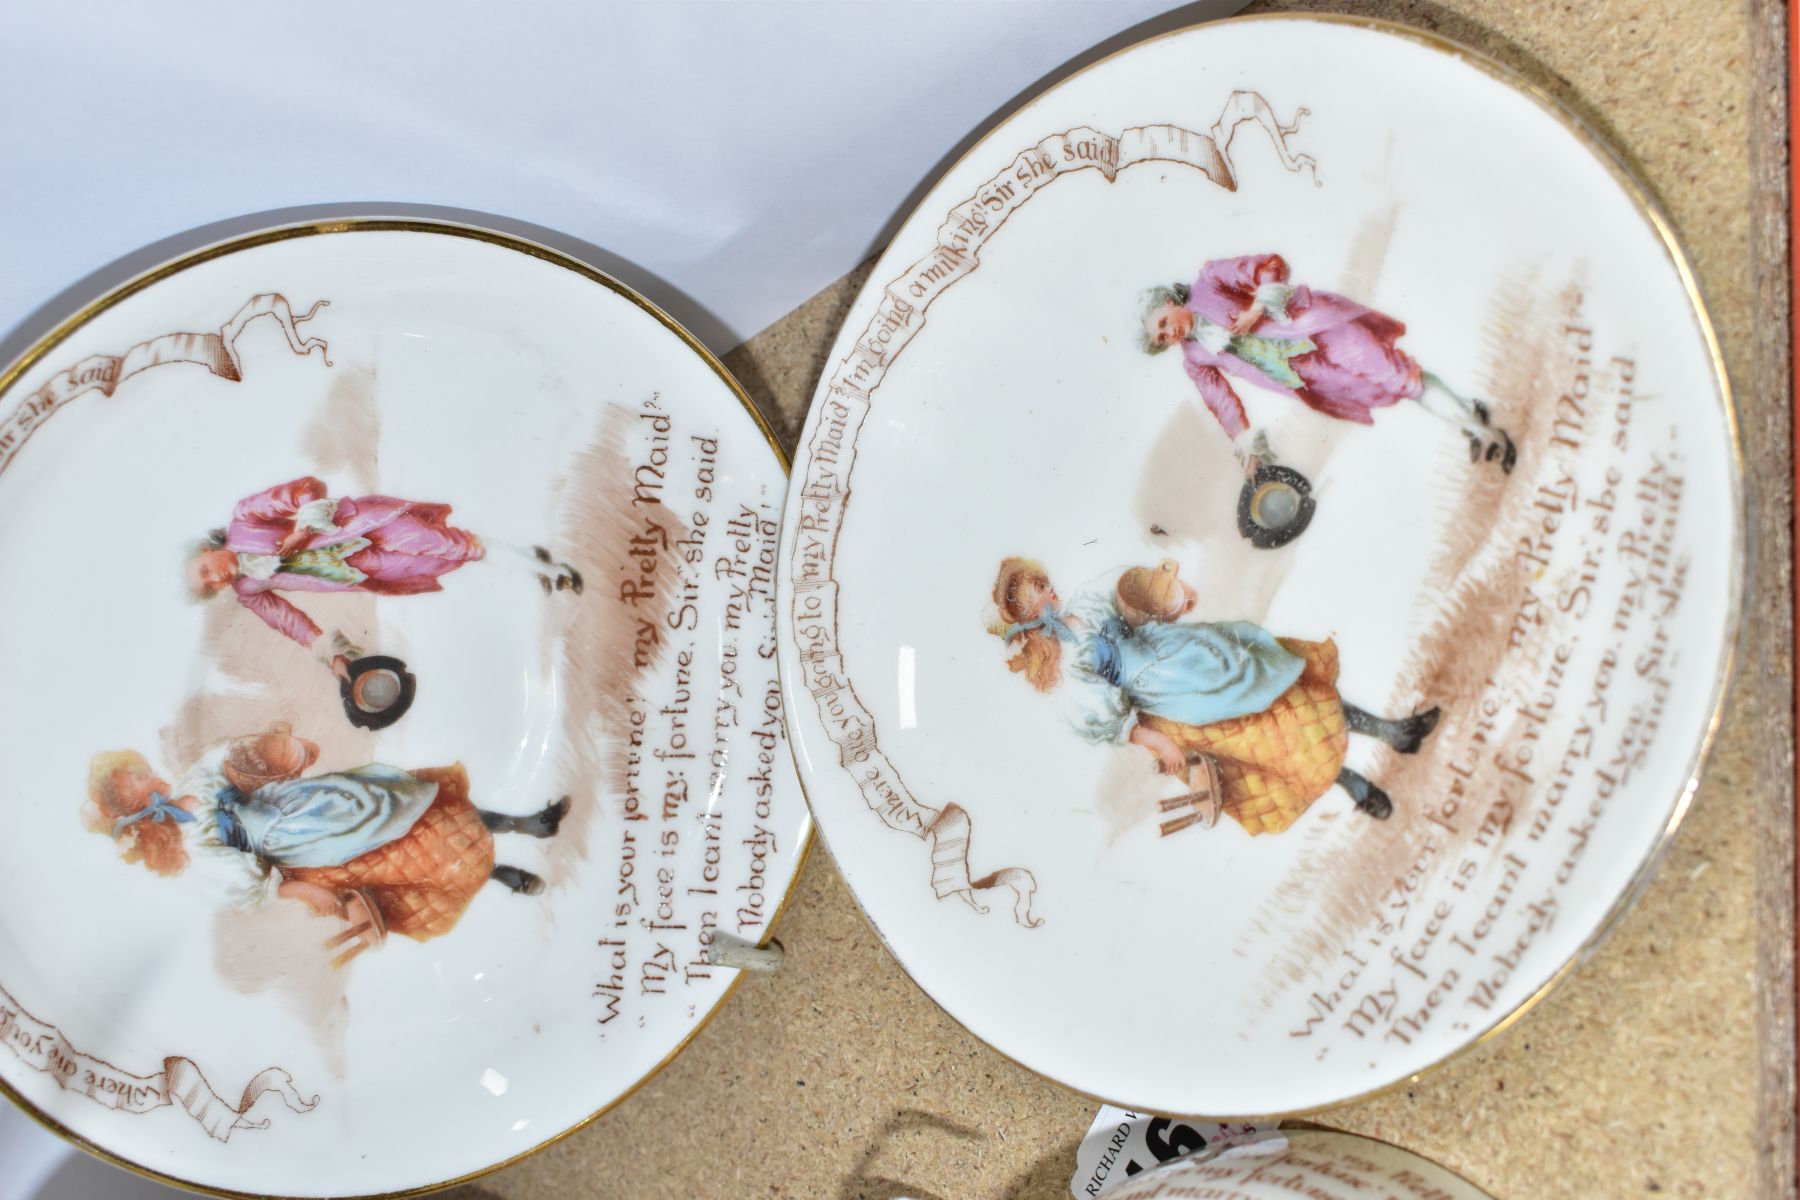 EIGHT PIECES OF ROYAL DOULTON NURSERY RHYMES 'A' SERIES WARE, DESIGNED BY WILLIAM SAVAGE COOPER, ' - Image 8 of 9